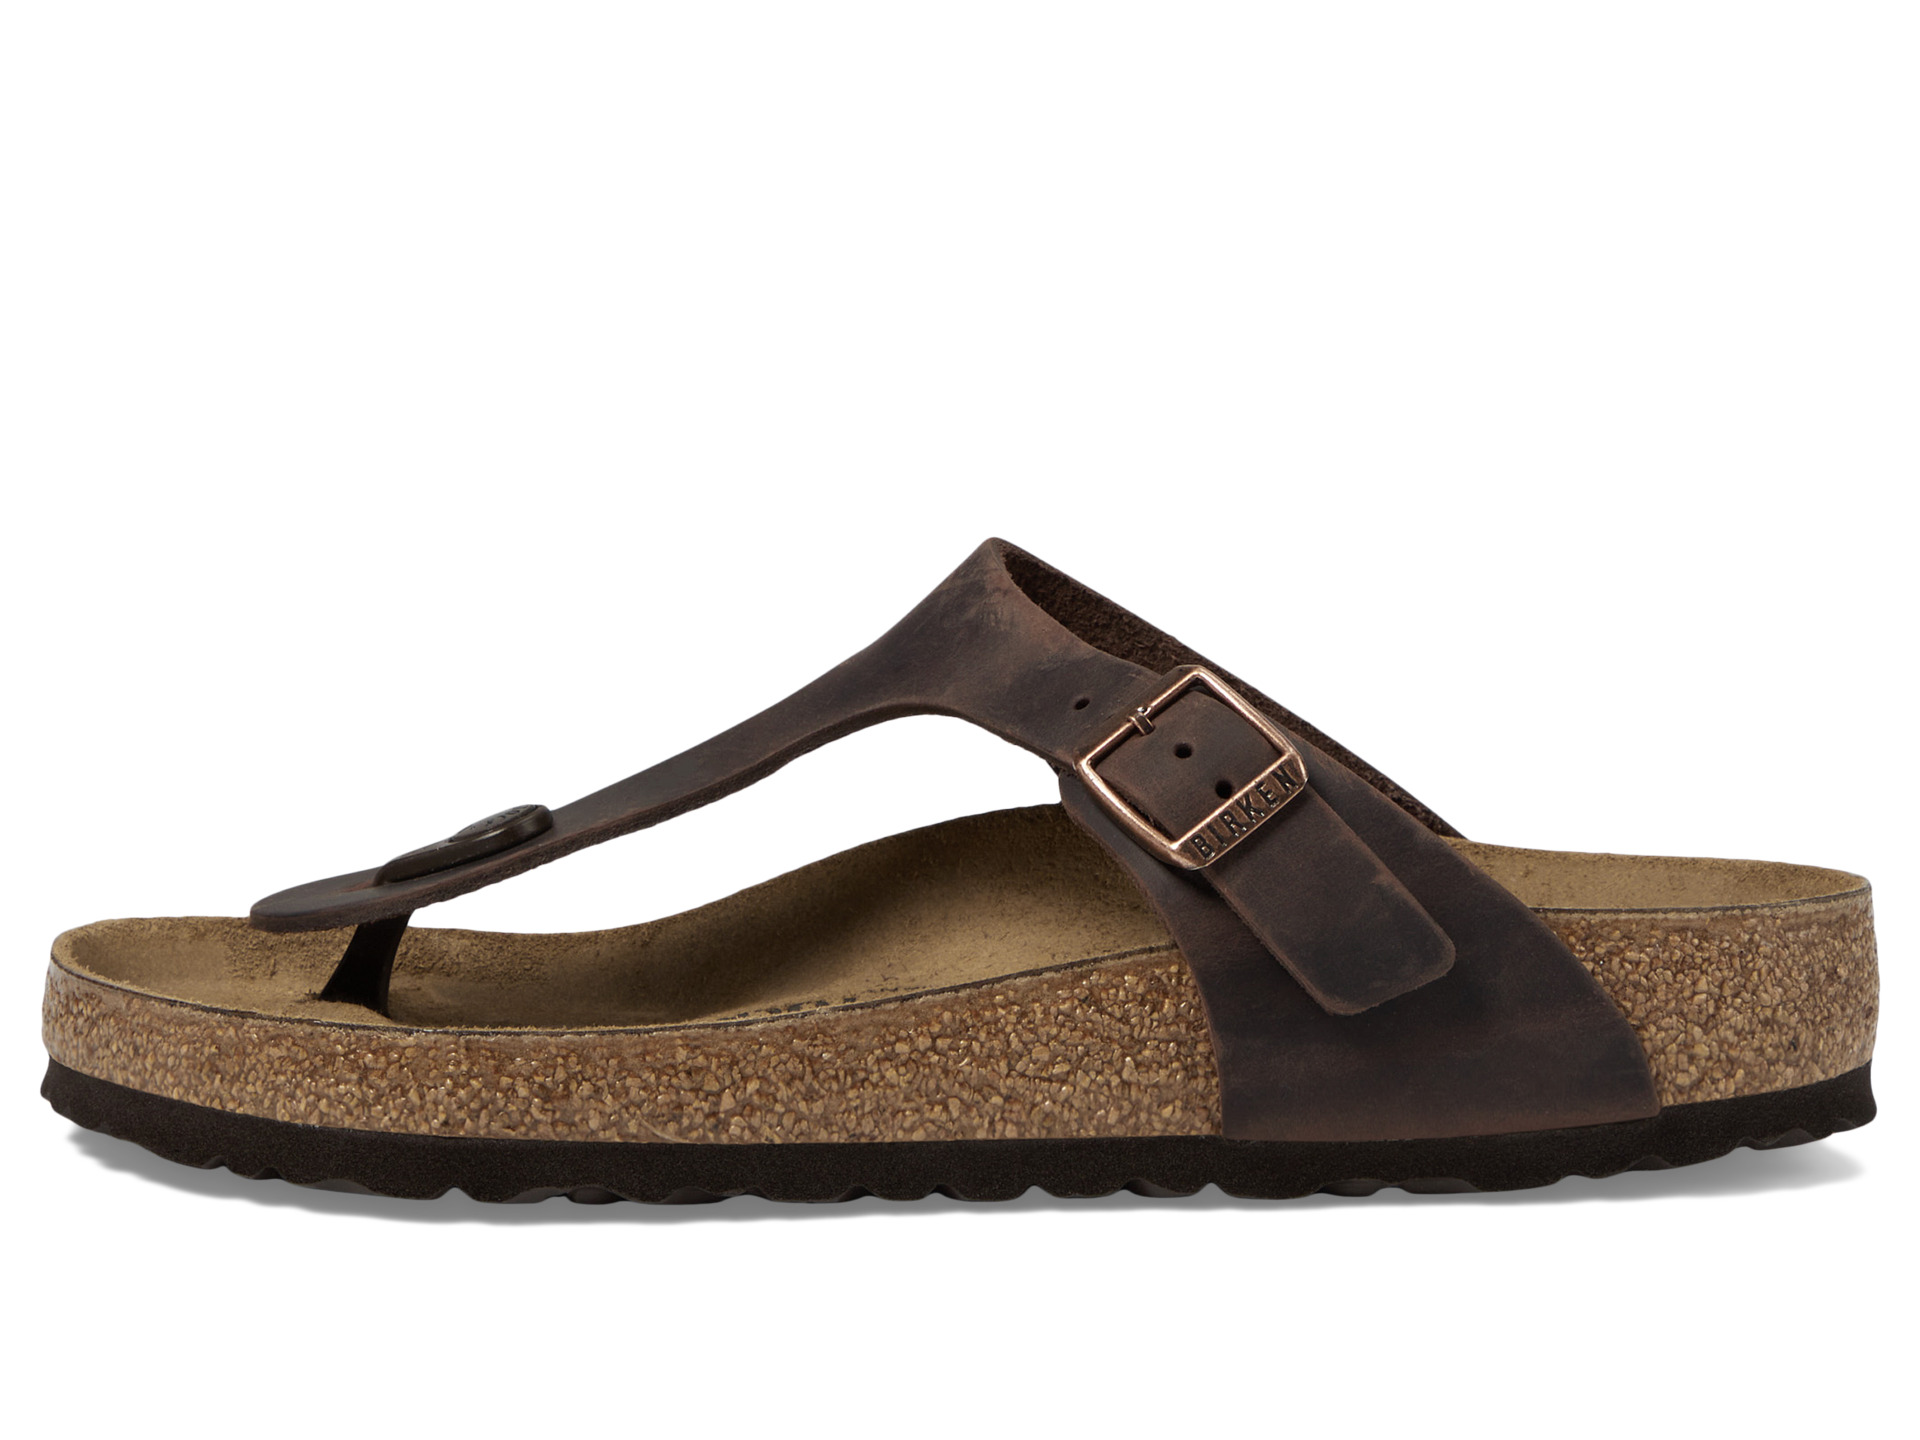 Birkenstock Gizeh Oiled Leather - Zappos Free Shipping BOTH Ways